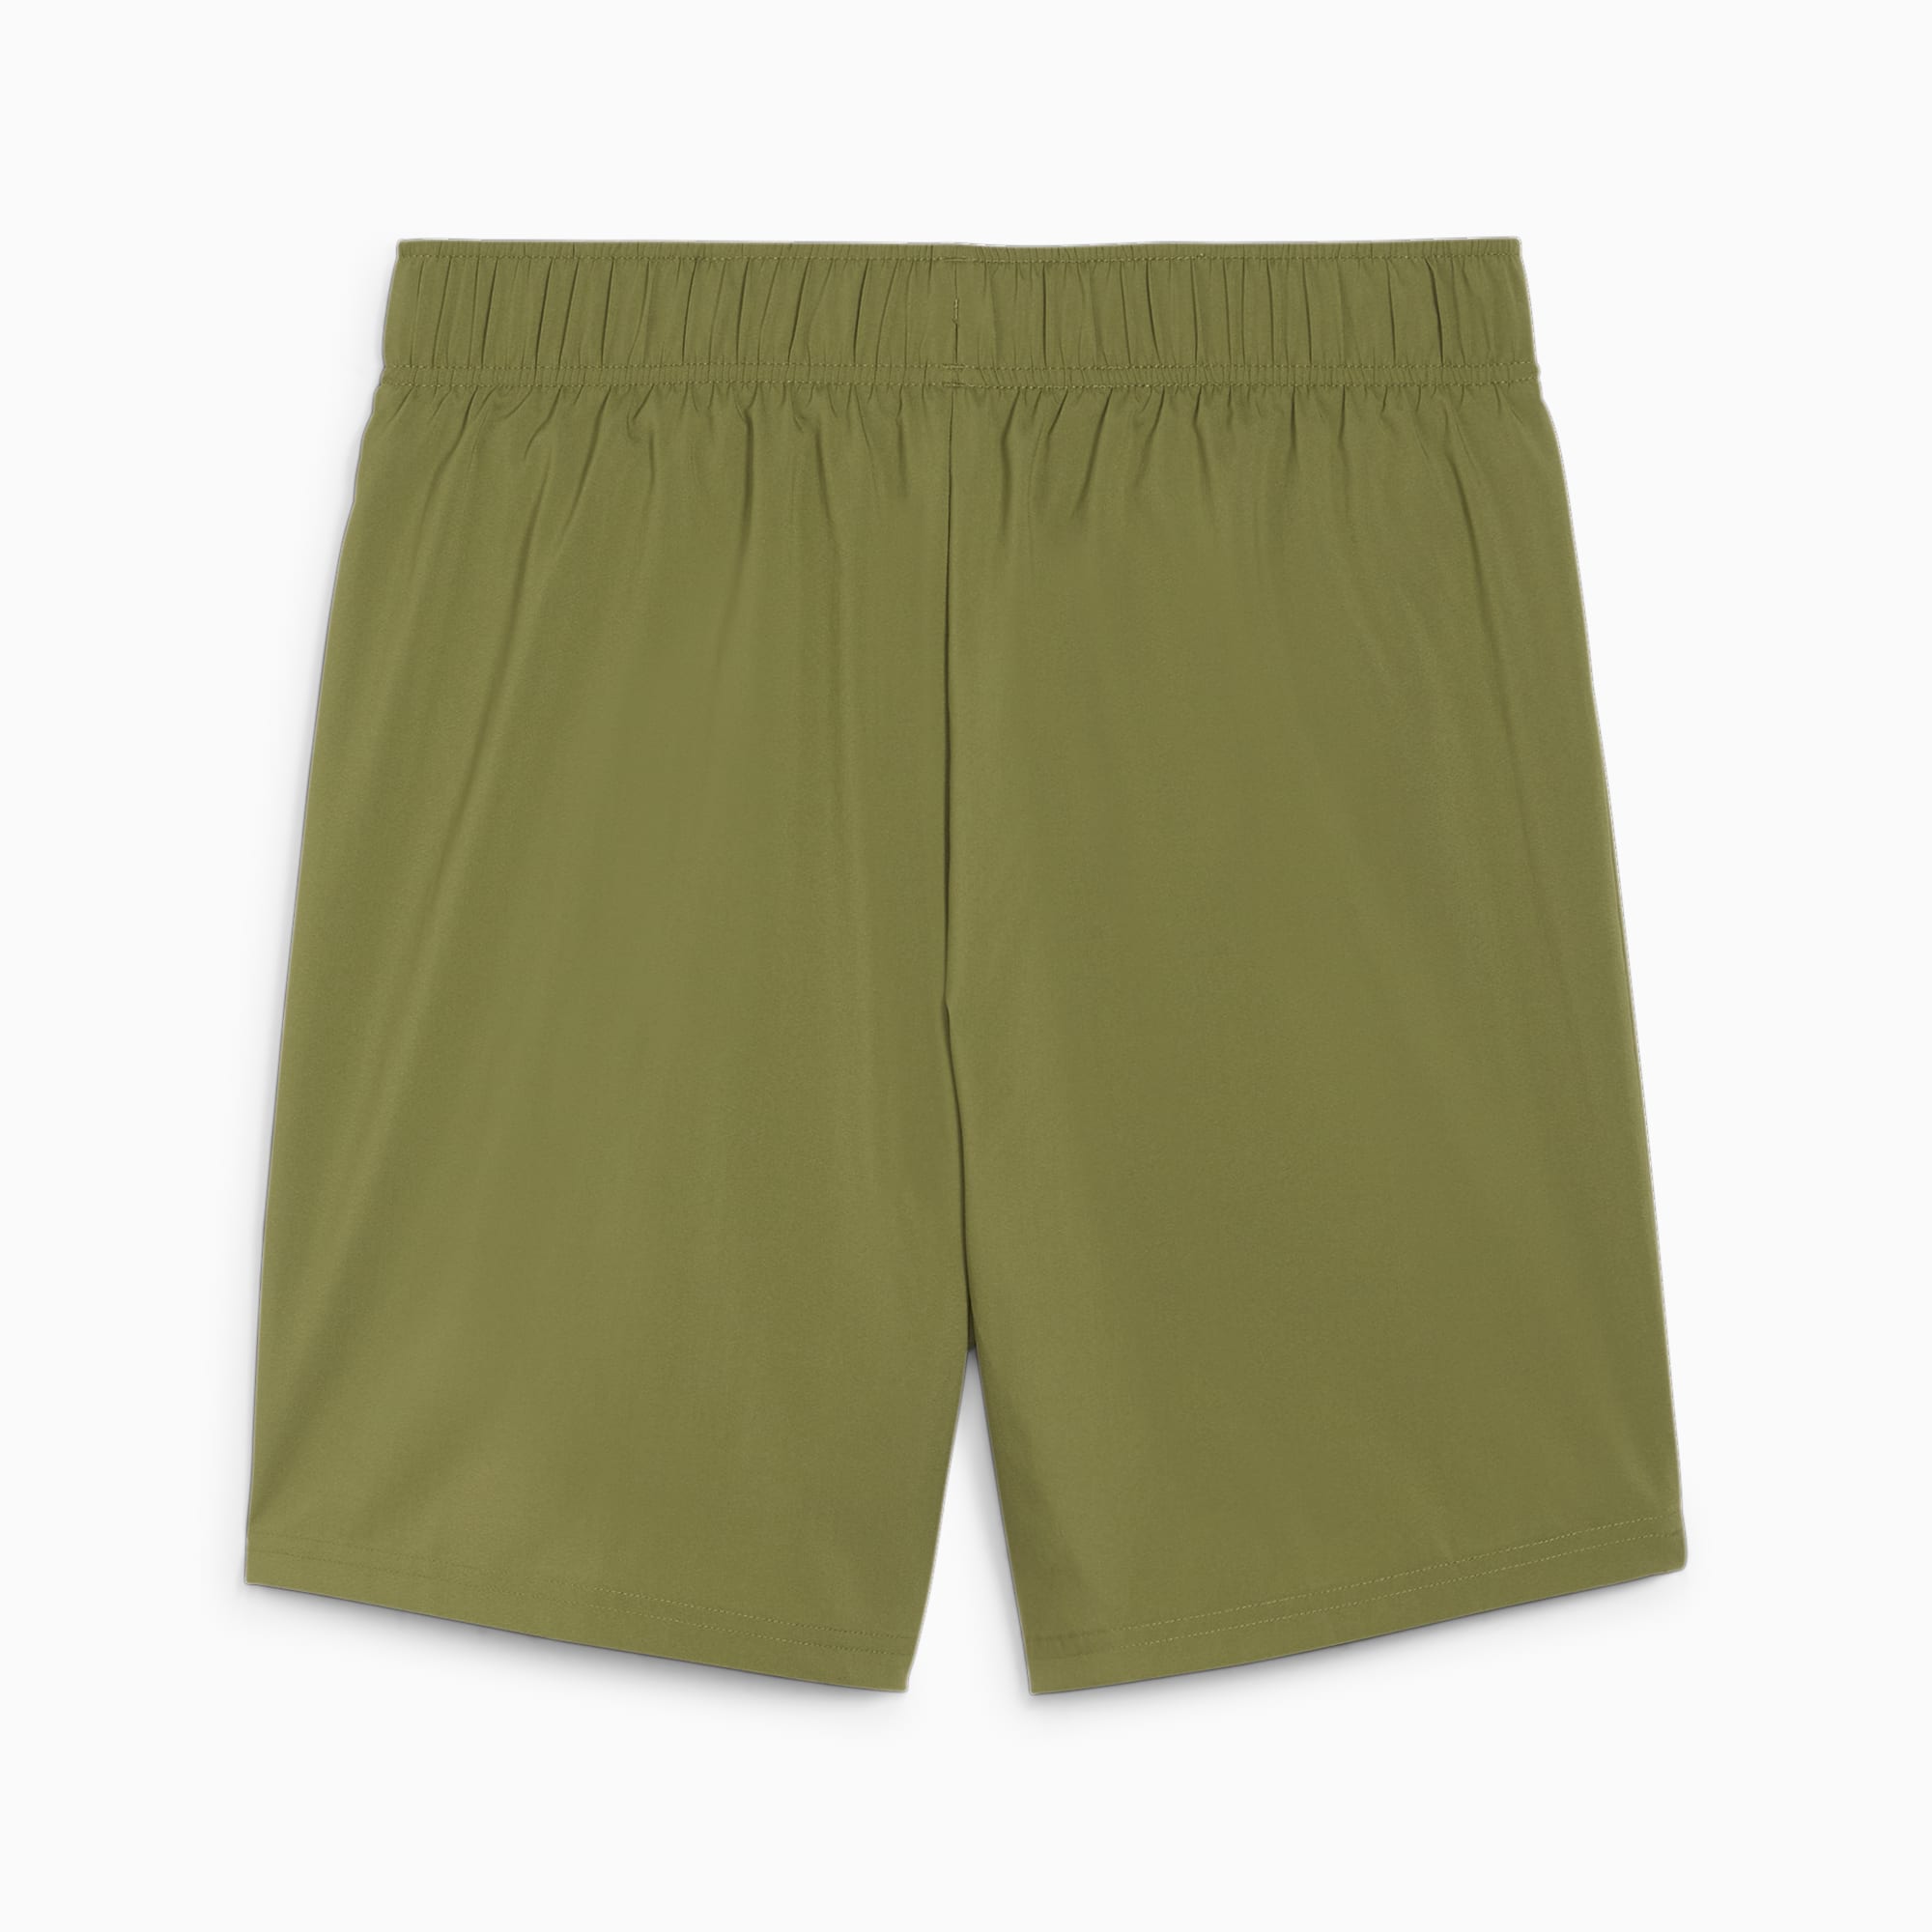 PUMA Favourite 2-in-1 Men's Running Shorts, Olive Green, Size M, Clothing